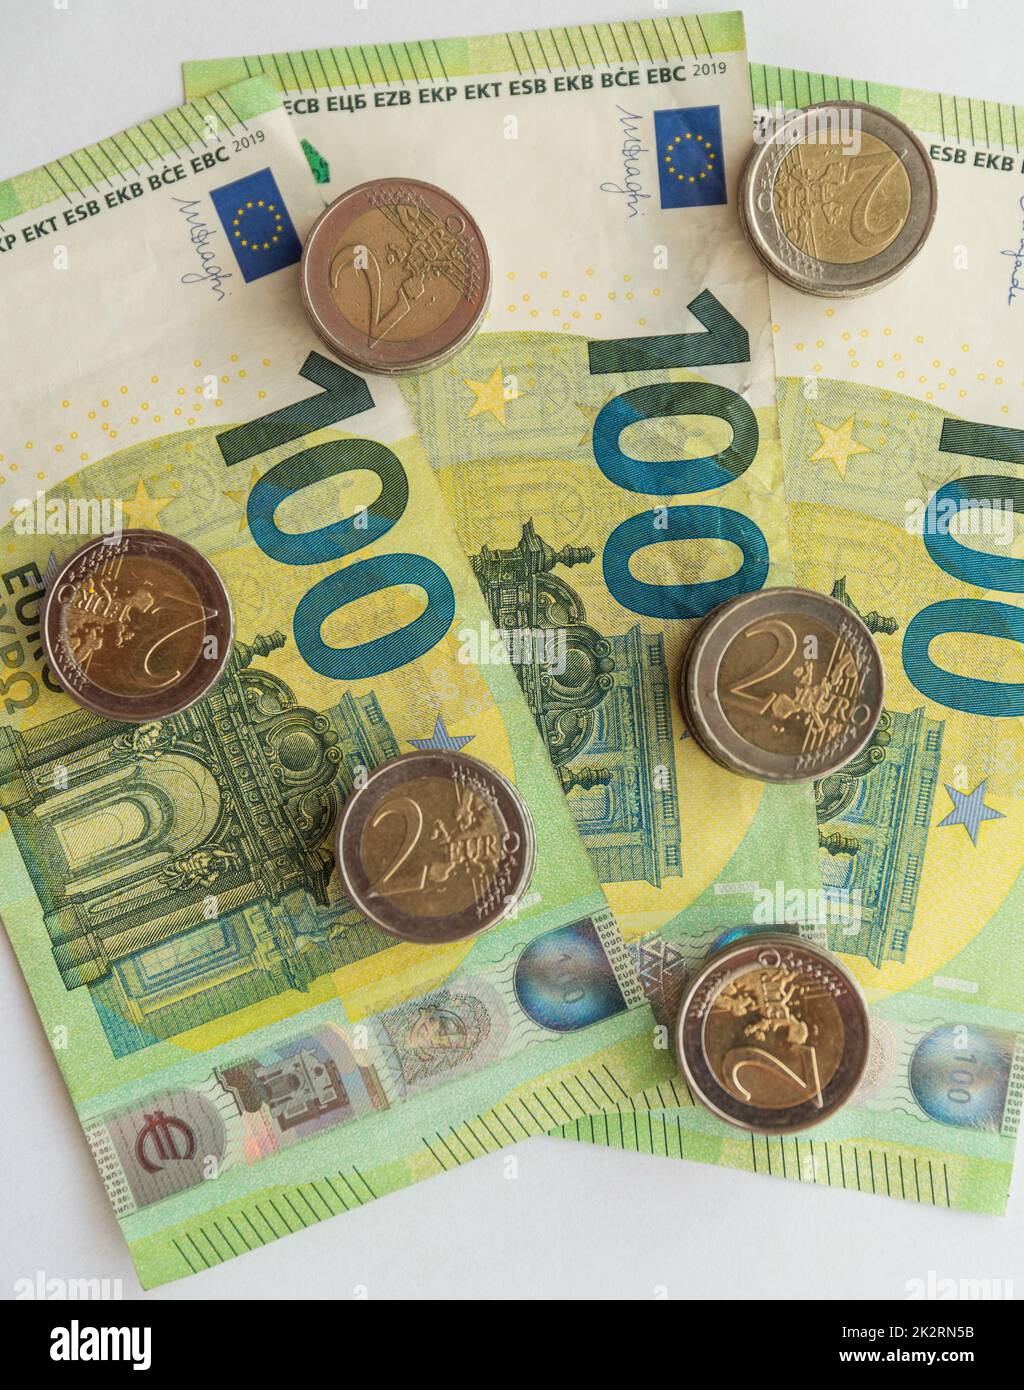 Means of payment Euro - paper money and coins, cash and cash payment Stock Photo